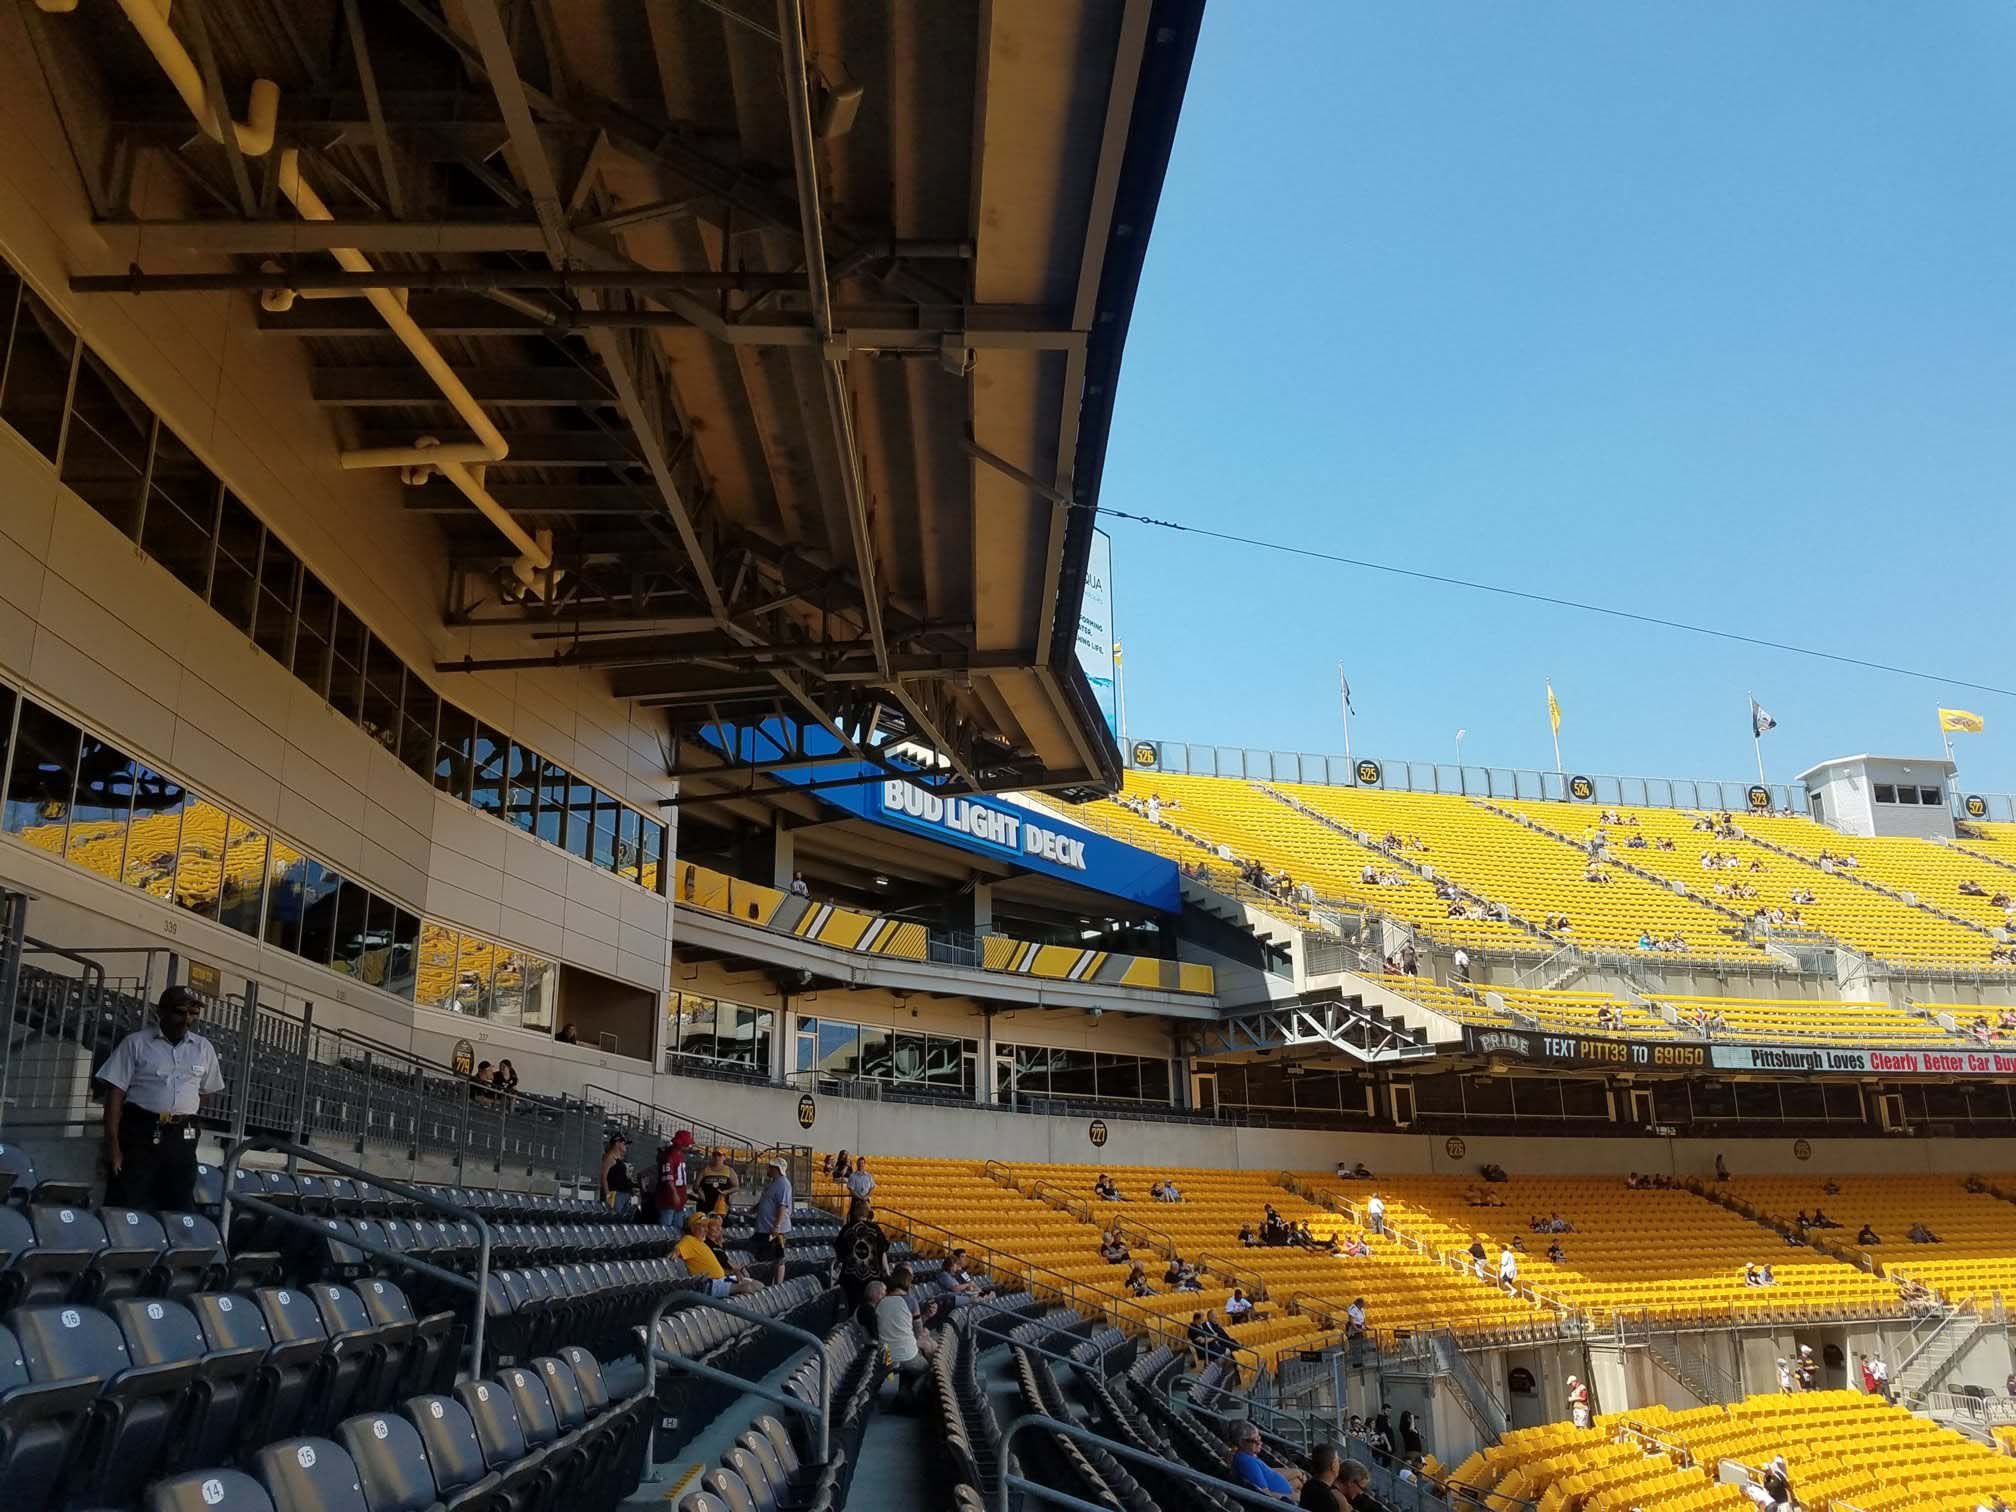 Steelers Interactive Seating Chart